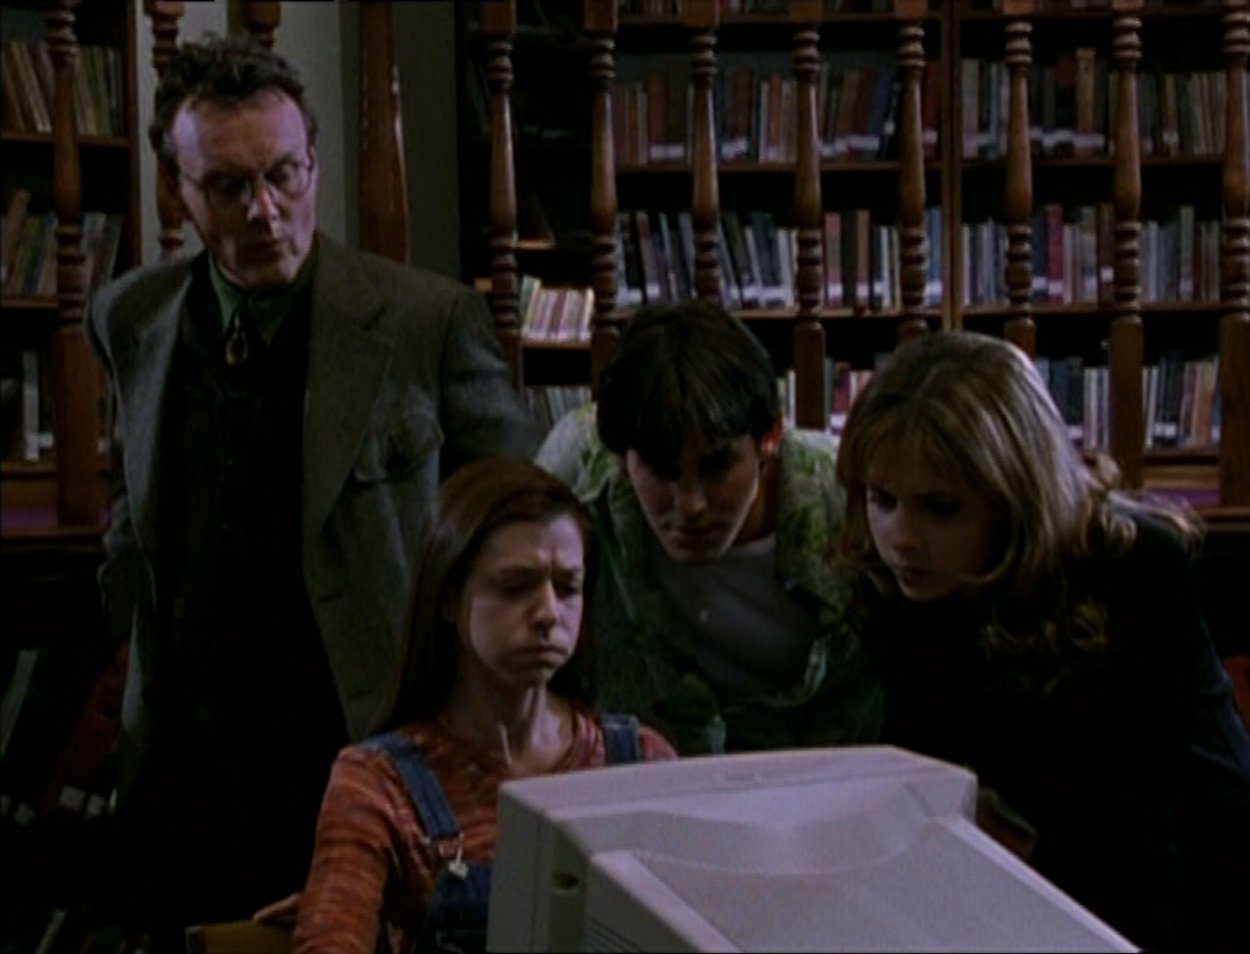 Giles, Willow, Xander and Buffy research in the library